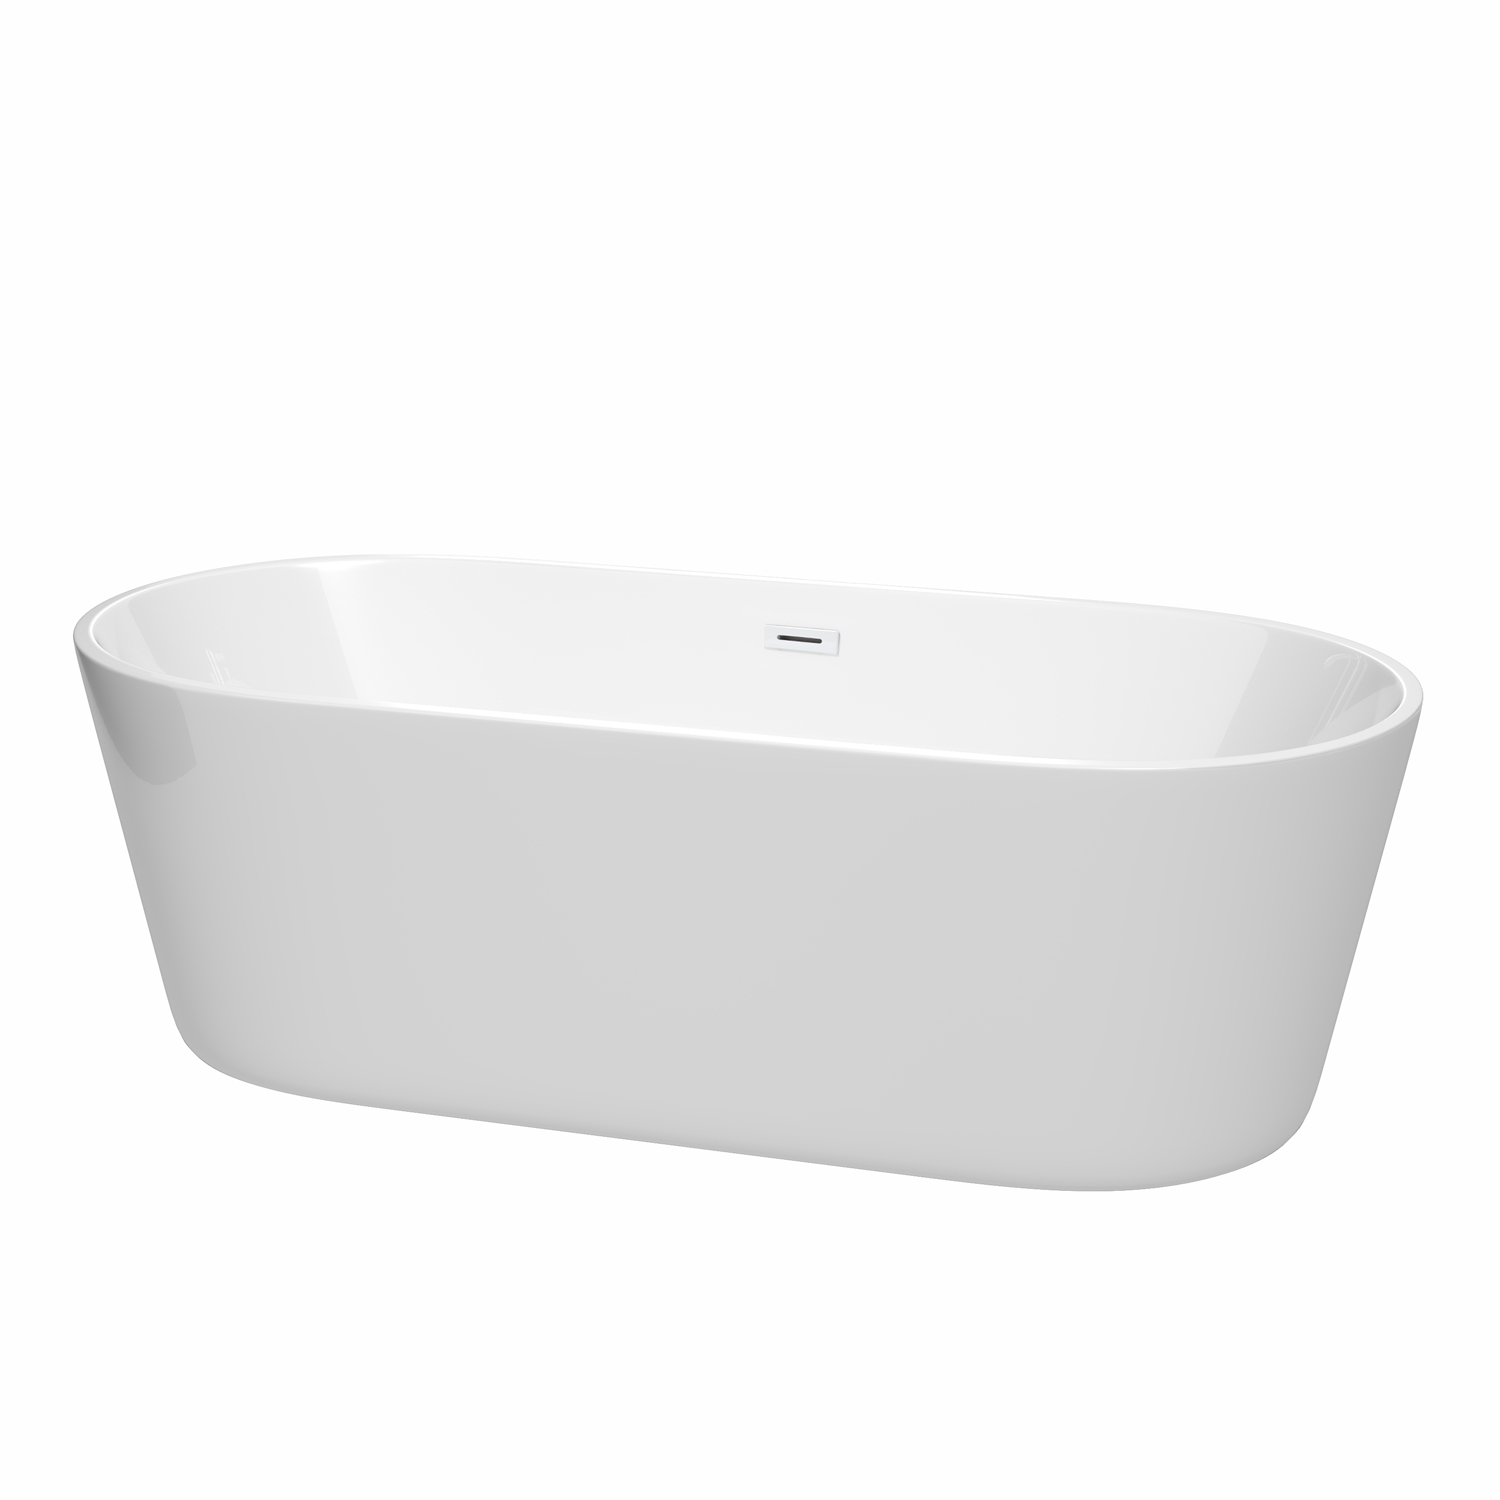 71" Freestanding Bathtub in White with Shiny White Pop-up Drain and Overflow Trim